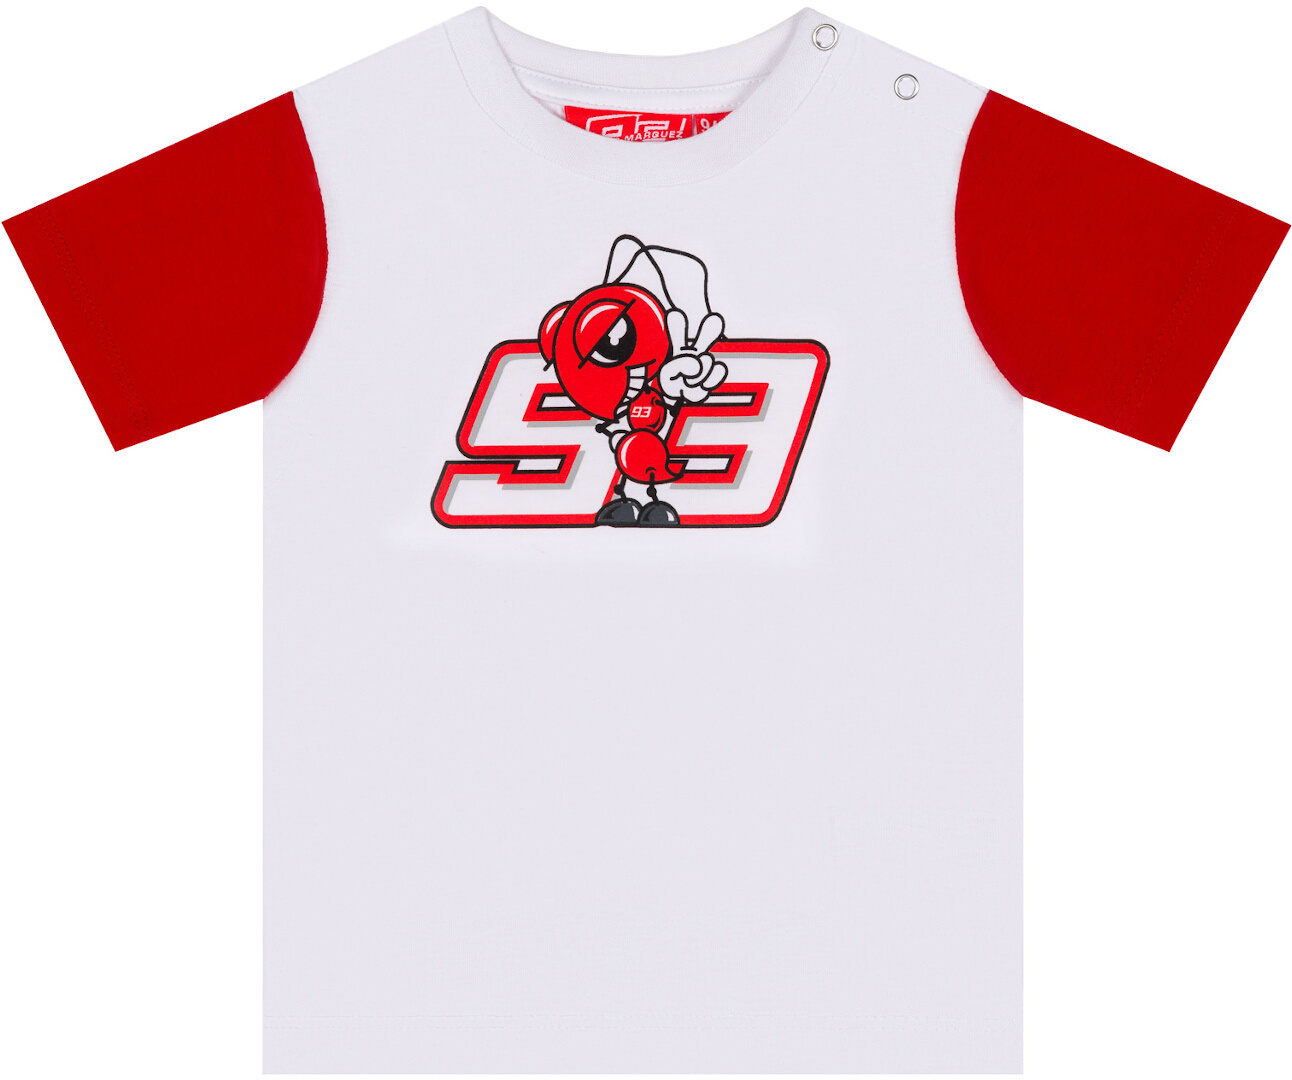 GP-Racing 93 Ant 93 Baby T-Shirt, white-red, Size 6 - 9 months, white-red, Size 6 - 9 months